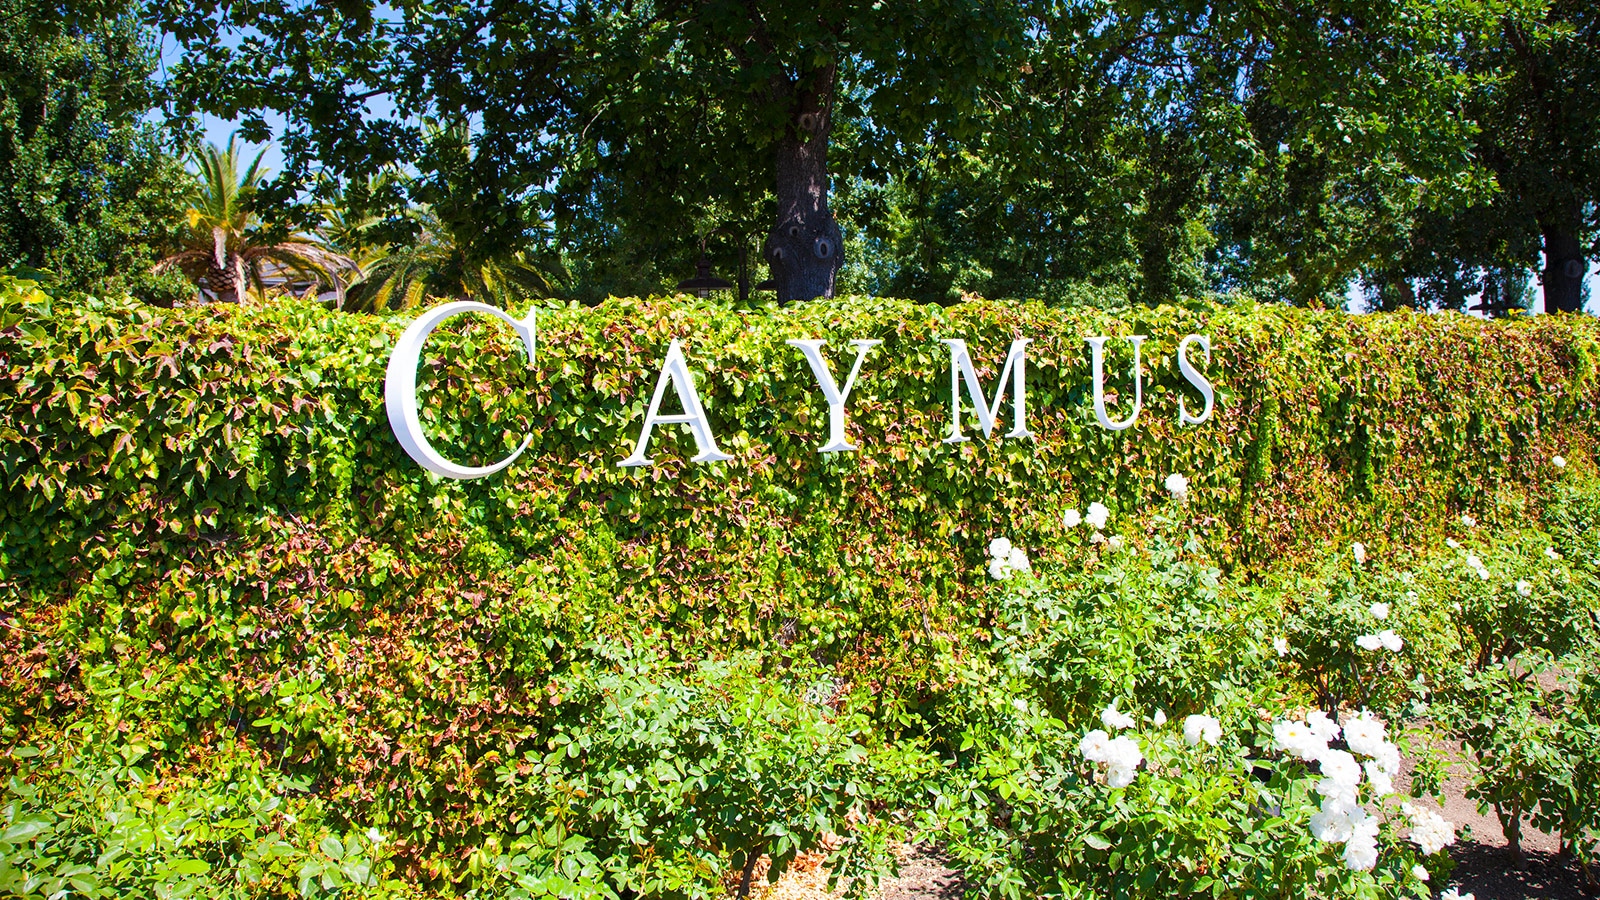 Meyer Sound Brings New Depth to the Caymus Tasting Room Experience